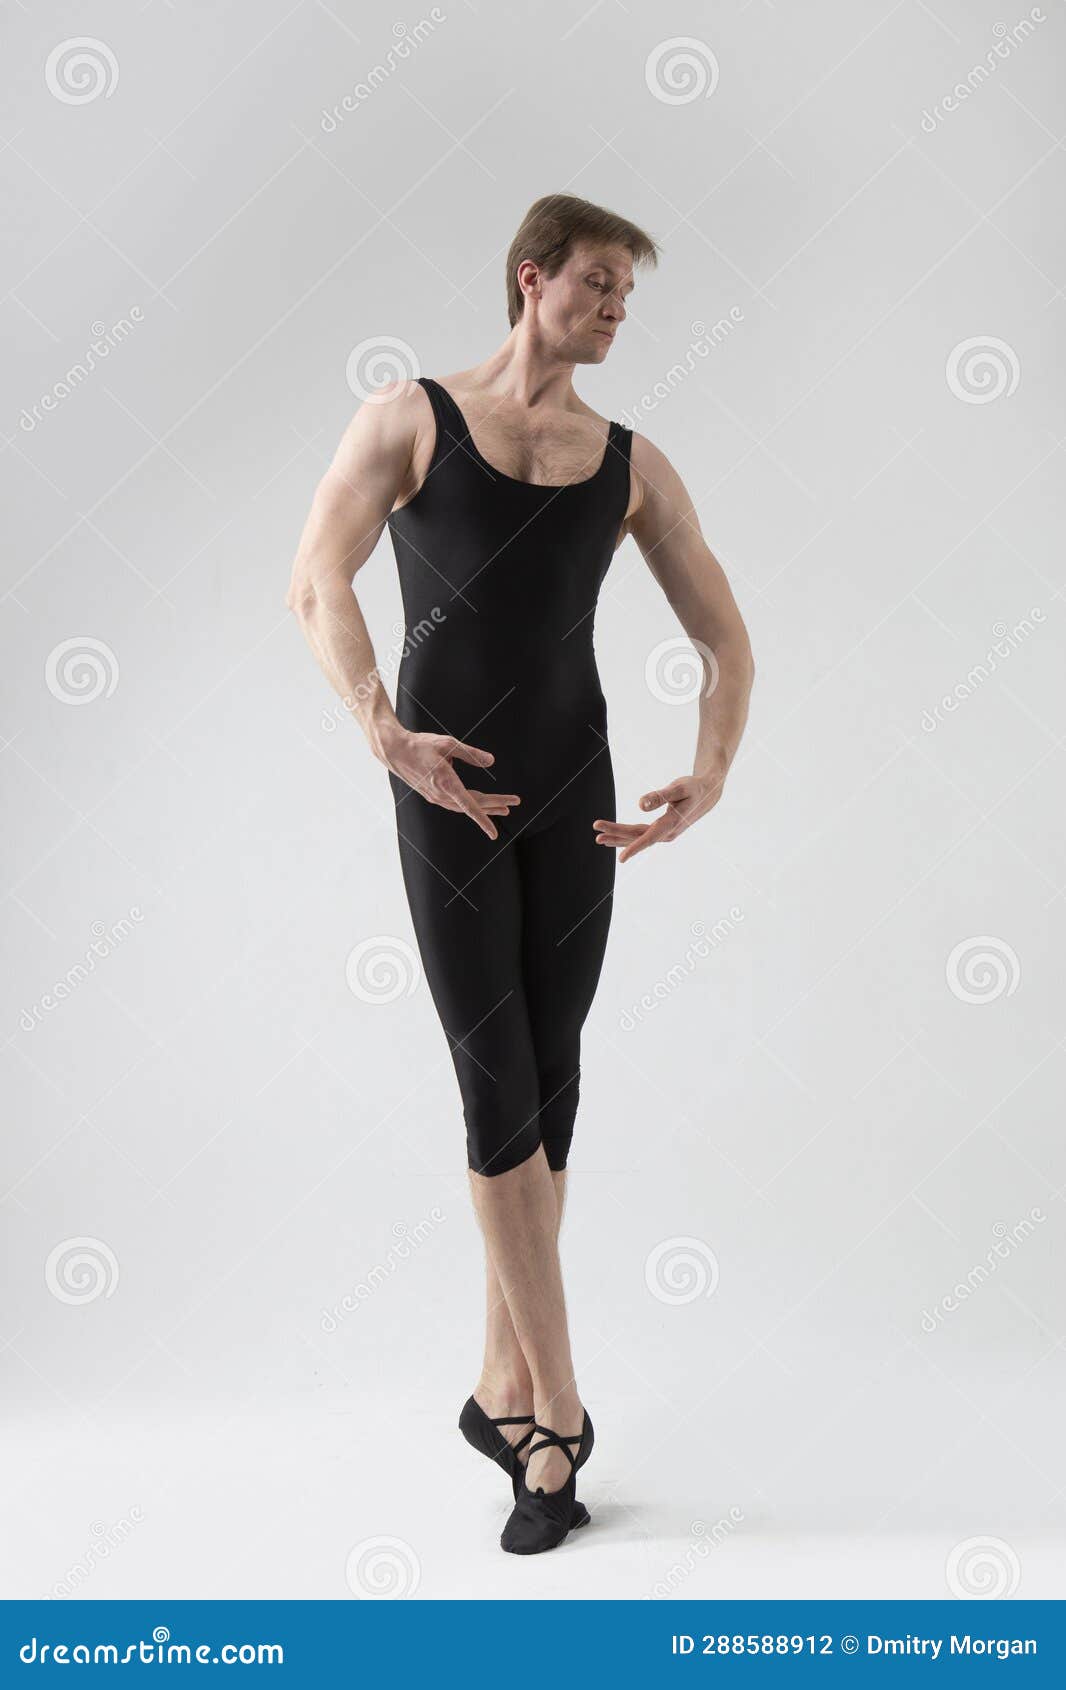 Tranquil Contemporary Ballet Dancer Flexible Athletic Man Posing in ...